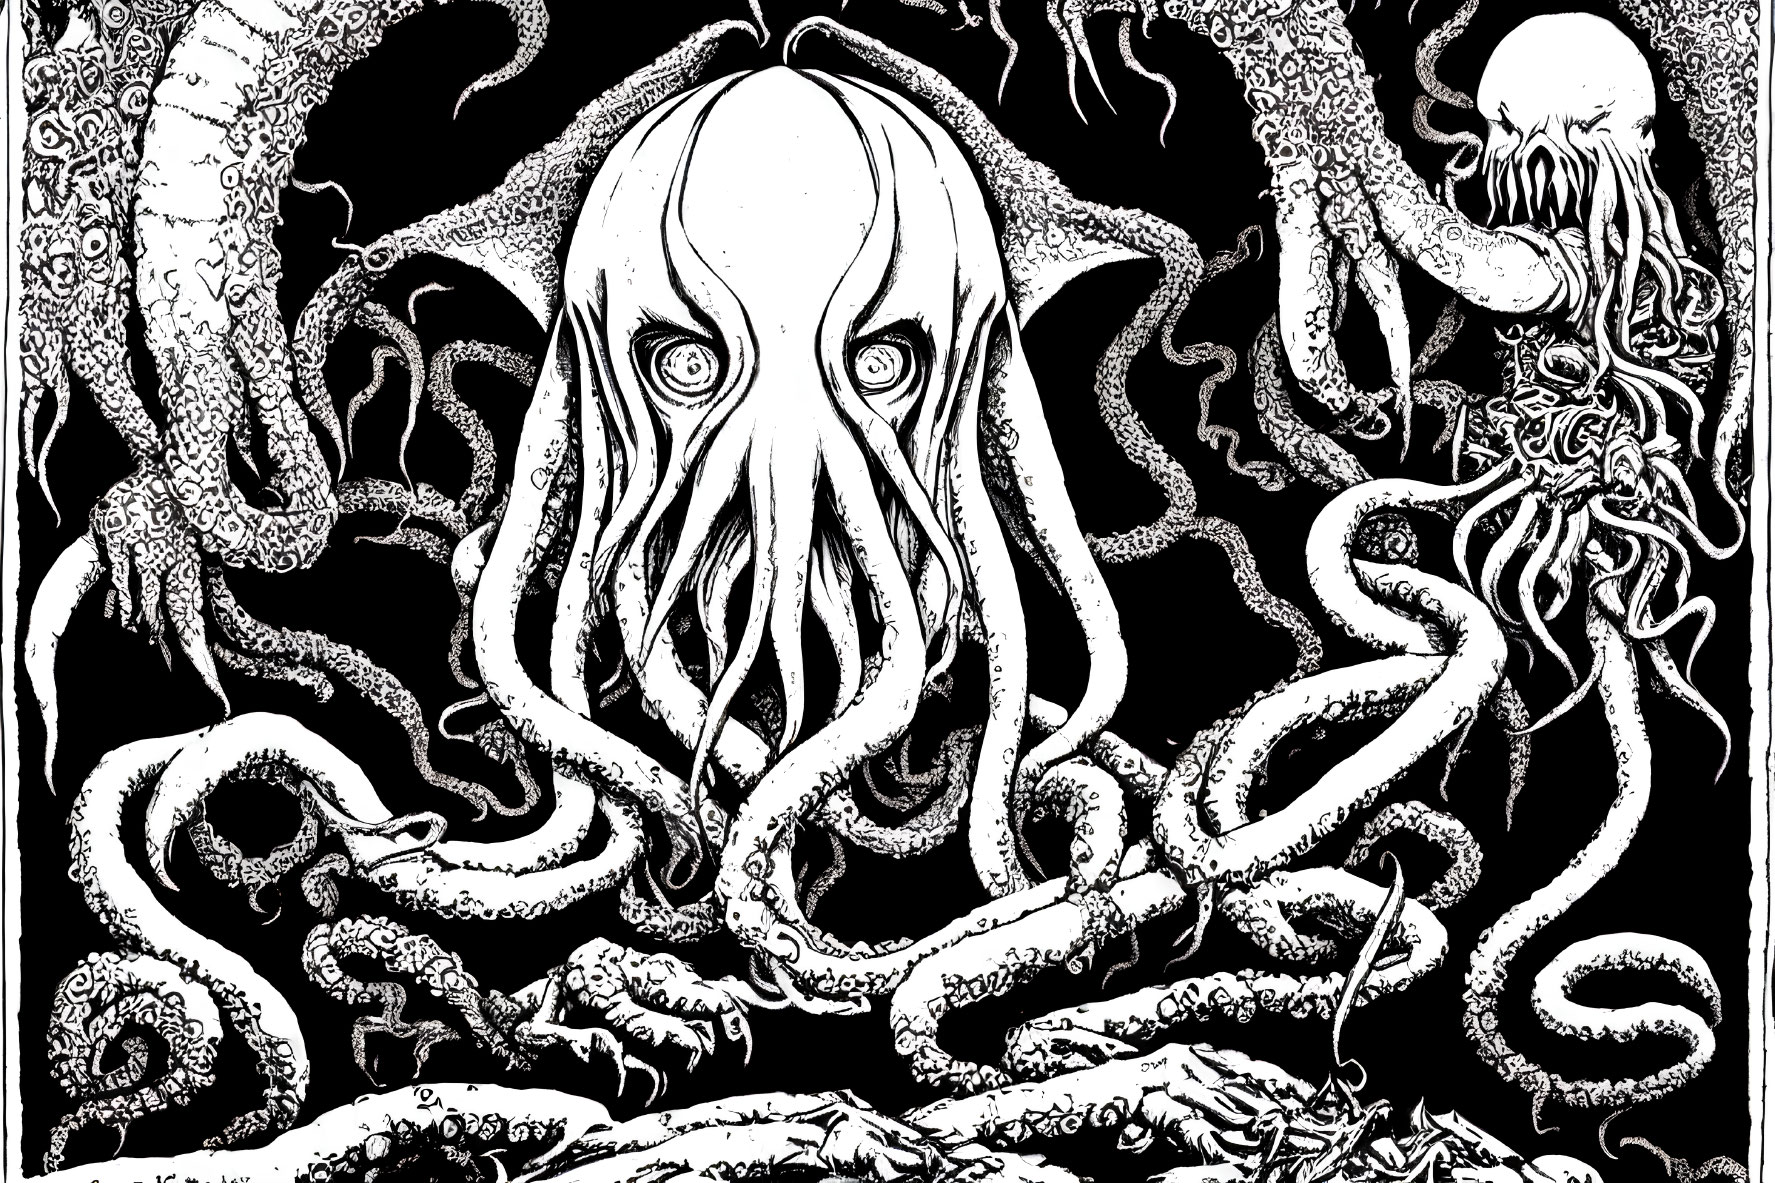 Detailed monochrome octopus illustration with ornate patterns and serpentine tentacles